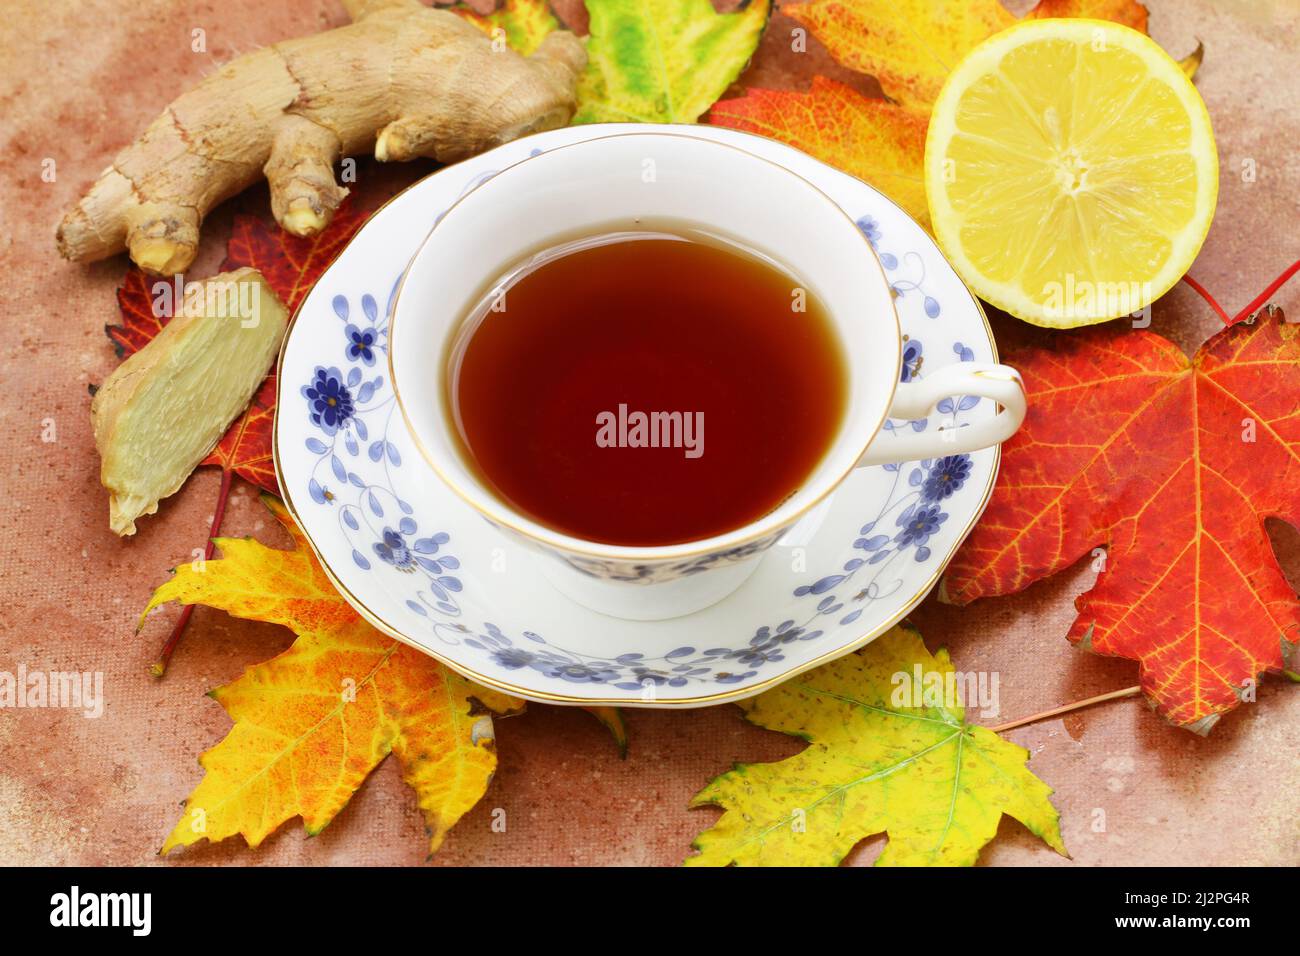 Black tea in vintage cup, lemon and fresh ginger on top of colorful autumn maple leaves on rustic wooden surface Stock Photo